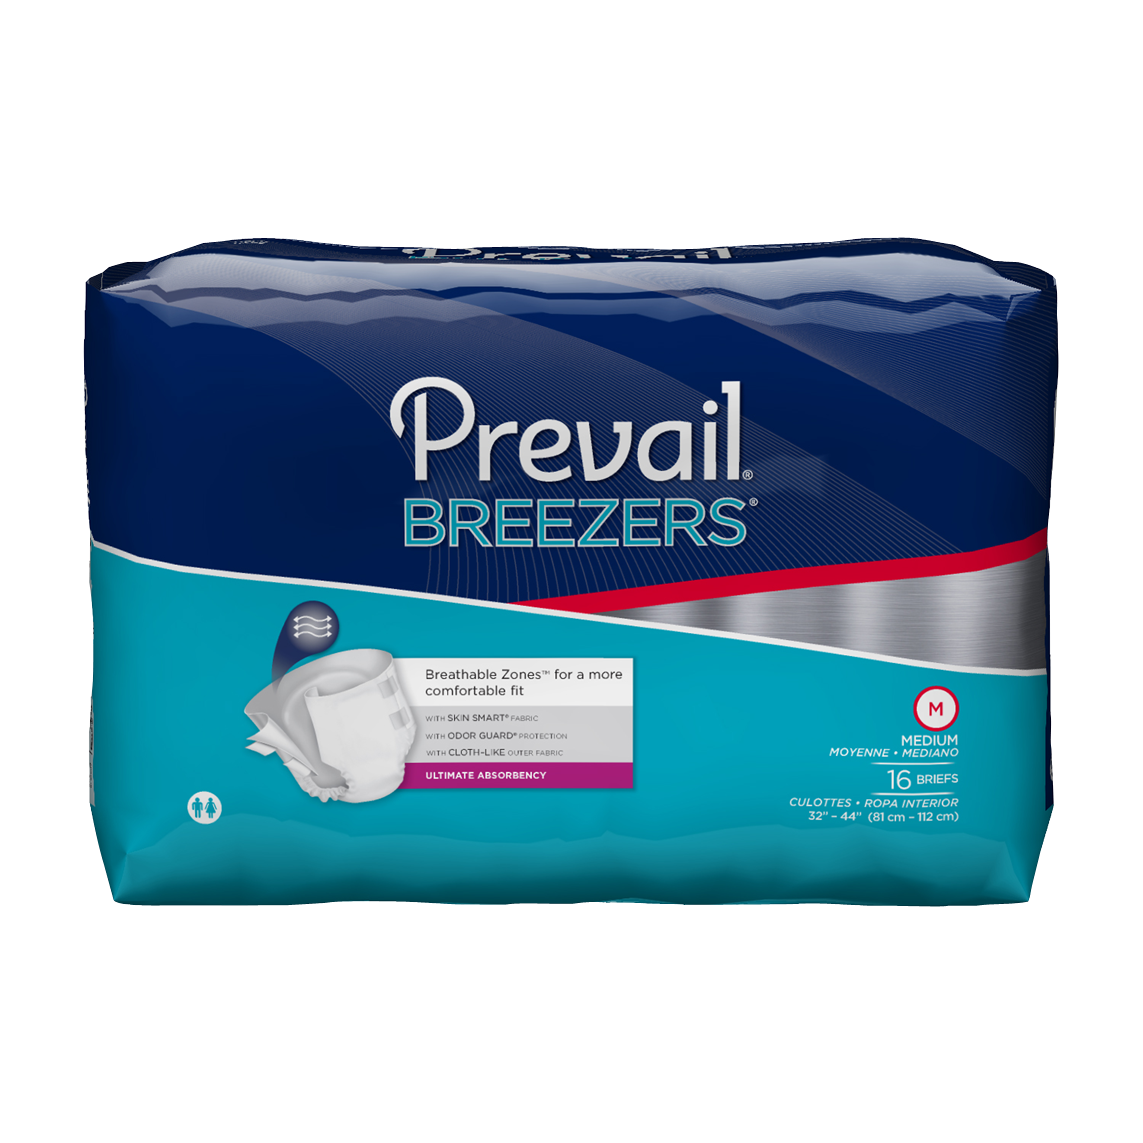 Adult diapers for heavy urinary incontinence